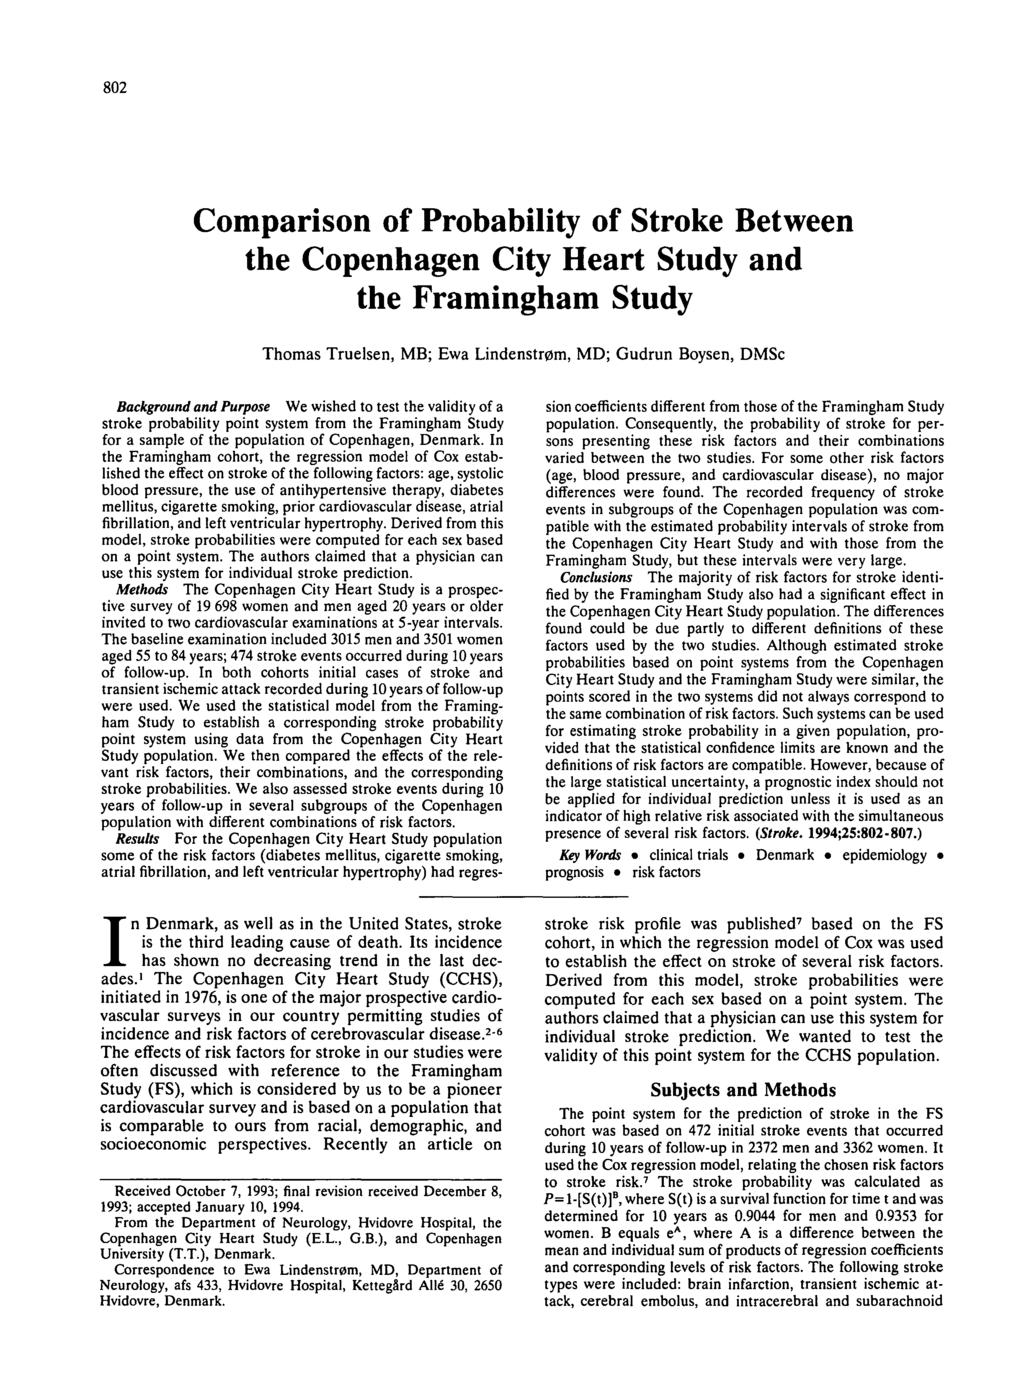 80 Comparison of Probability of Stroke Between the Copenhagen City Heart Study and the Framingham Study Thomas Truelsen, MB; Ewa Lindenstrtfm, MD; Gudrun Boysen, DMSc Background and Purpose We wished